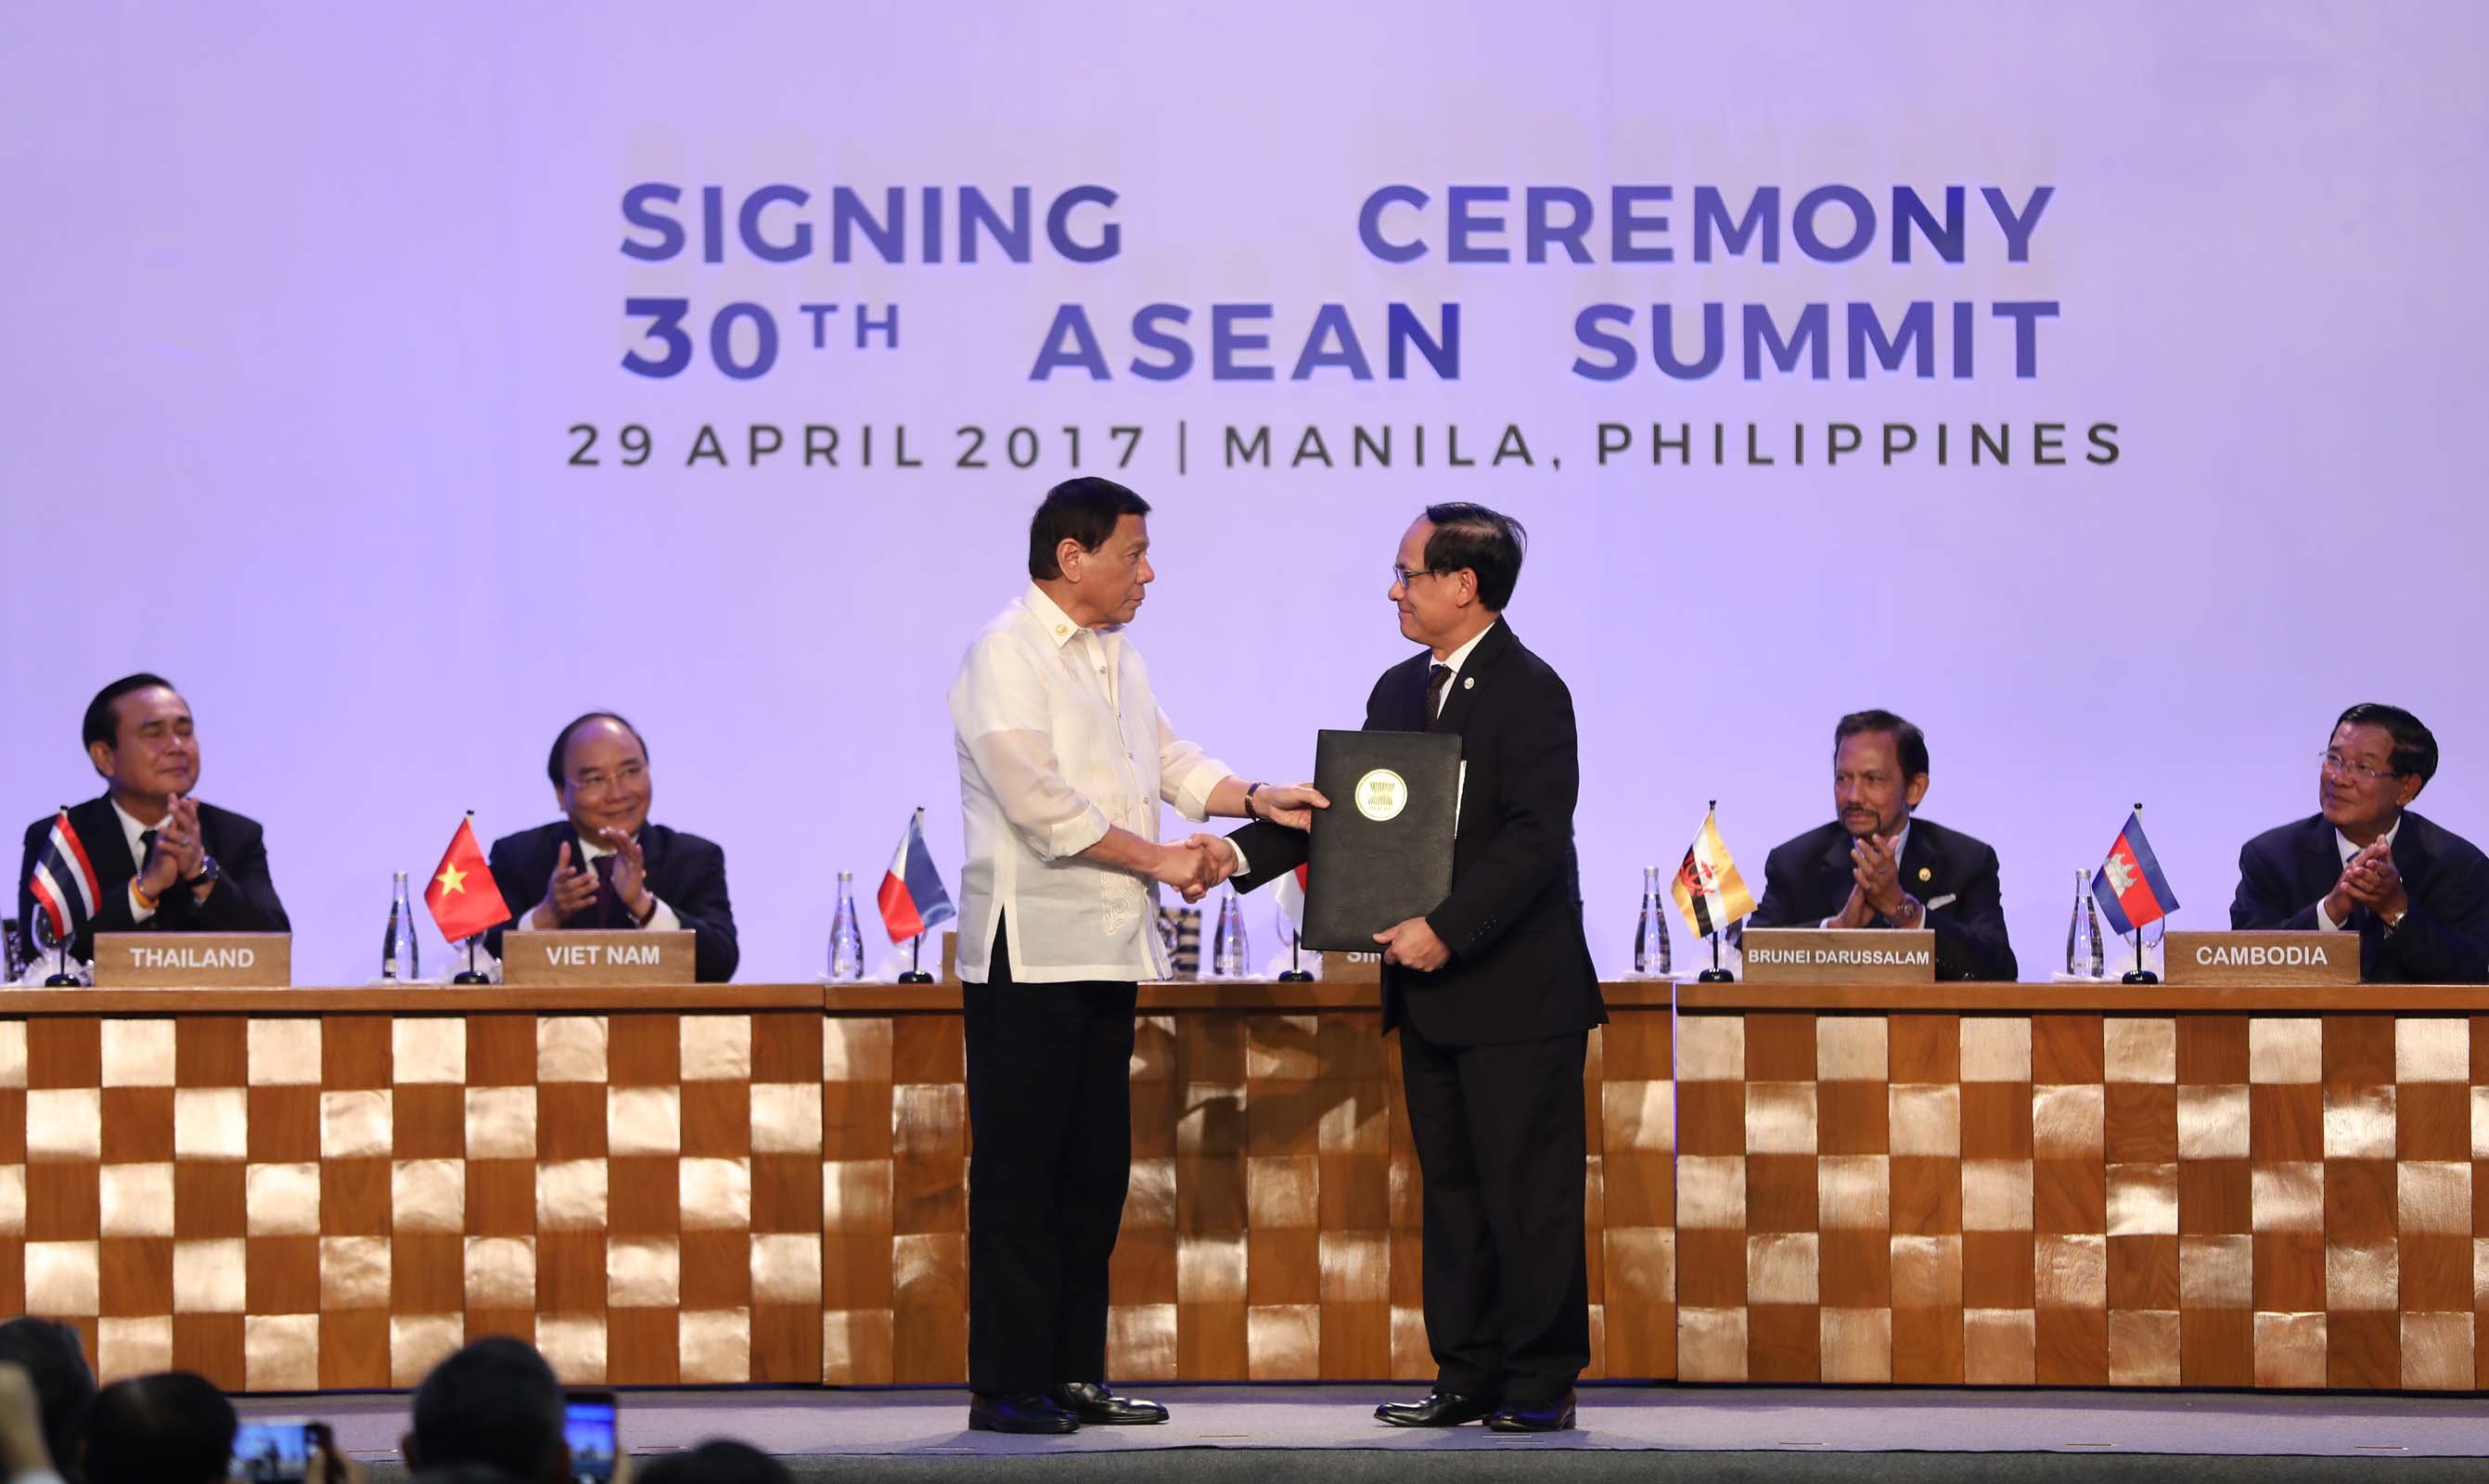 Pres. Duterte hands in document "ASEAN Declaration on the Role of the Civil Service as a Catalyst for Achieving  the ASEAN Community Vision 2025